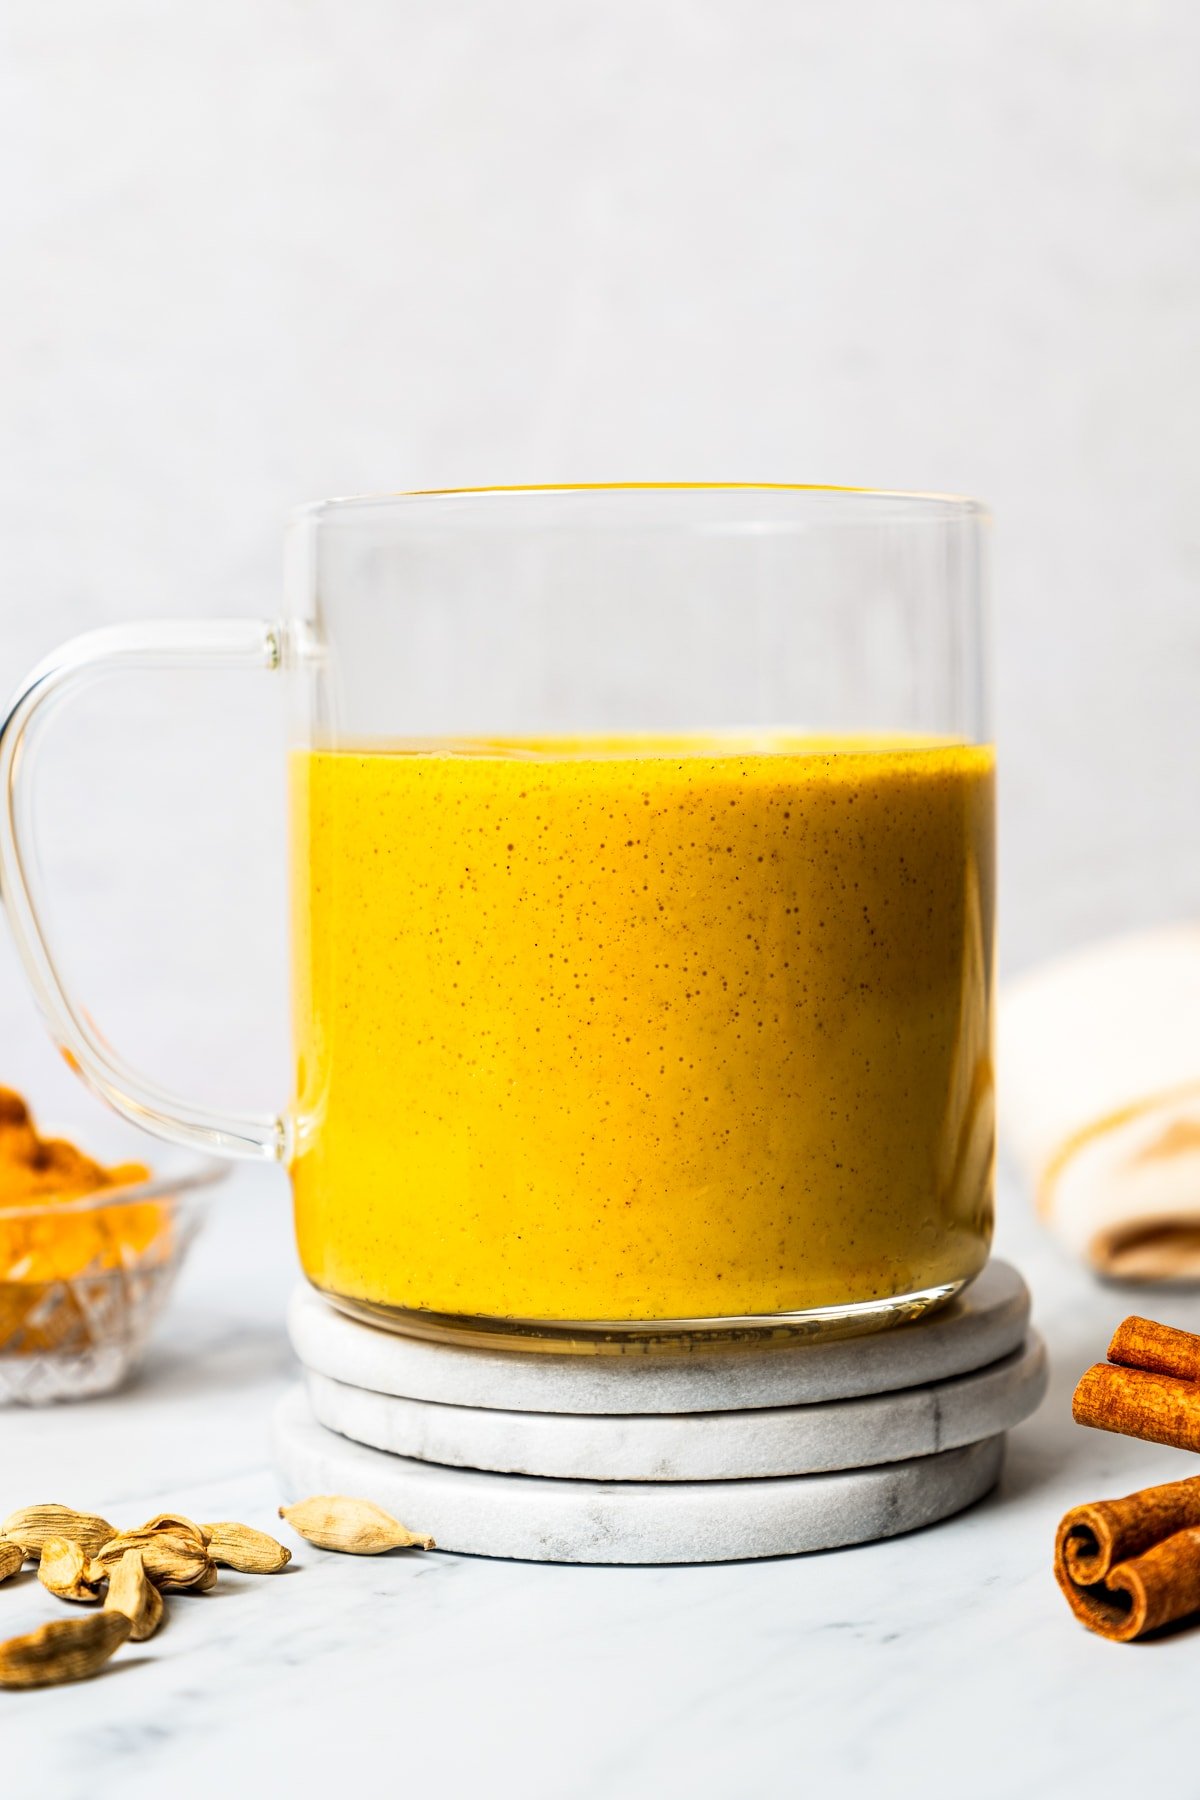 A glass mug filled with turmeric latte near a bowl of turmeric and other whole spices.